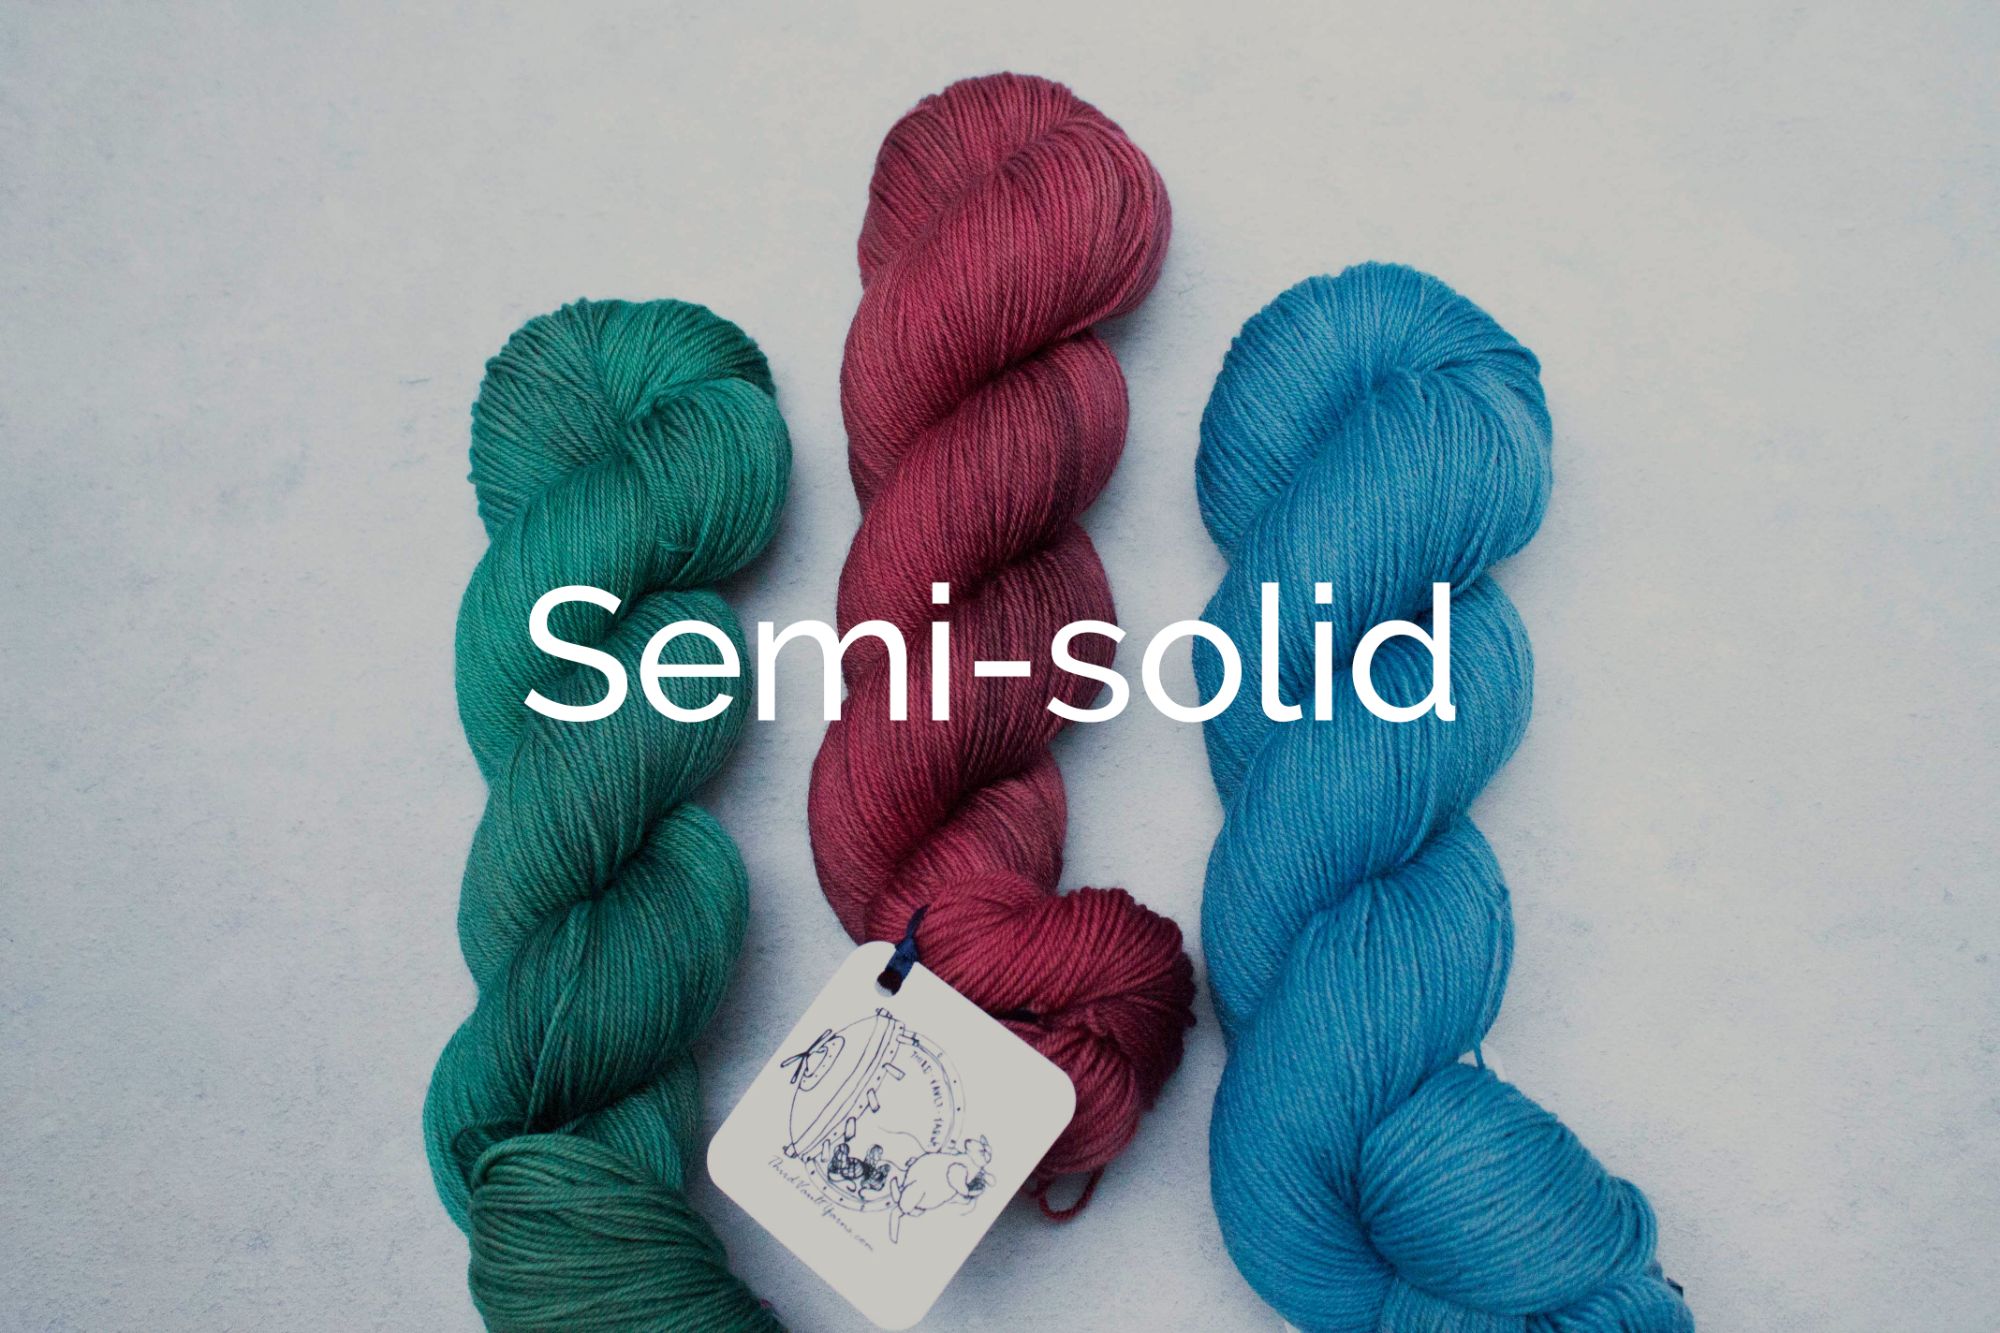 Check out our Semisolid yarns